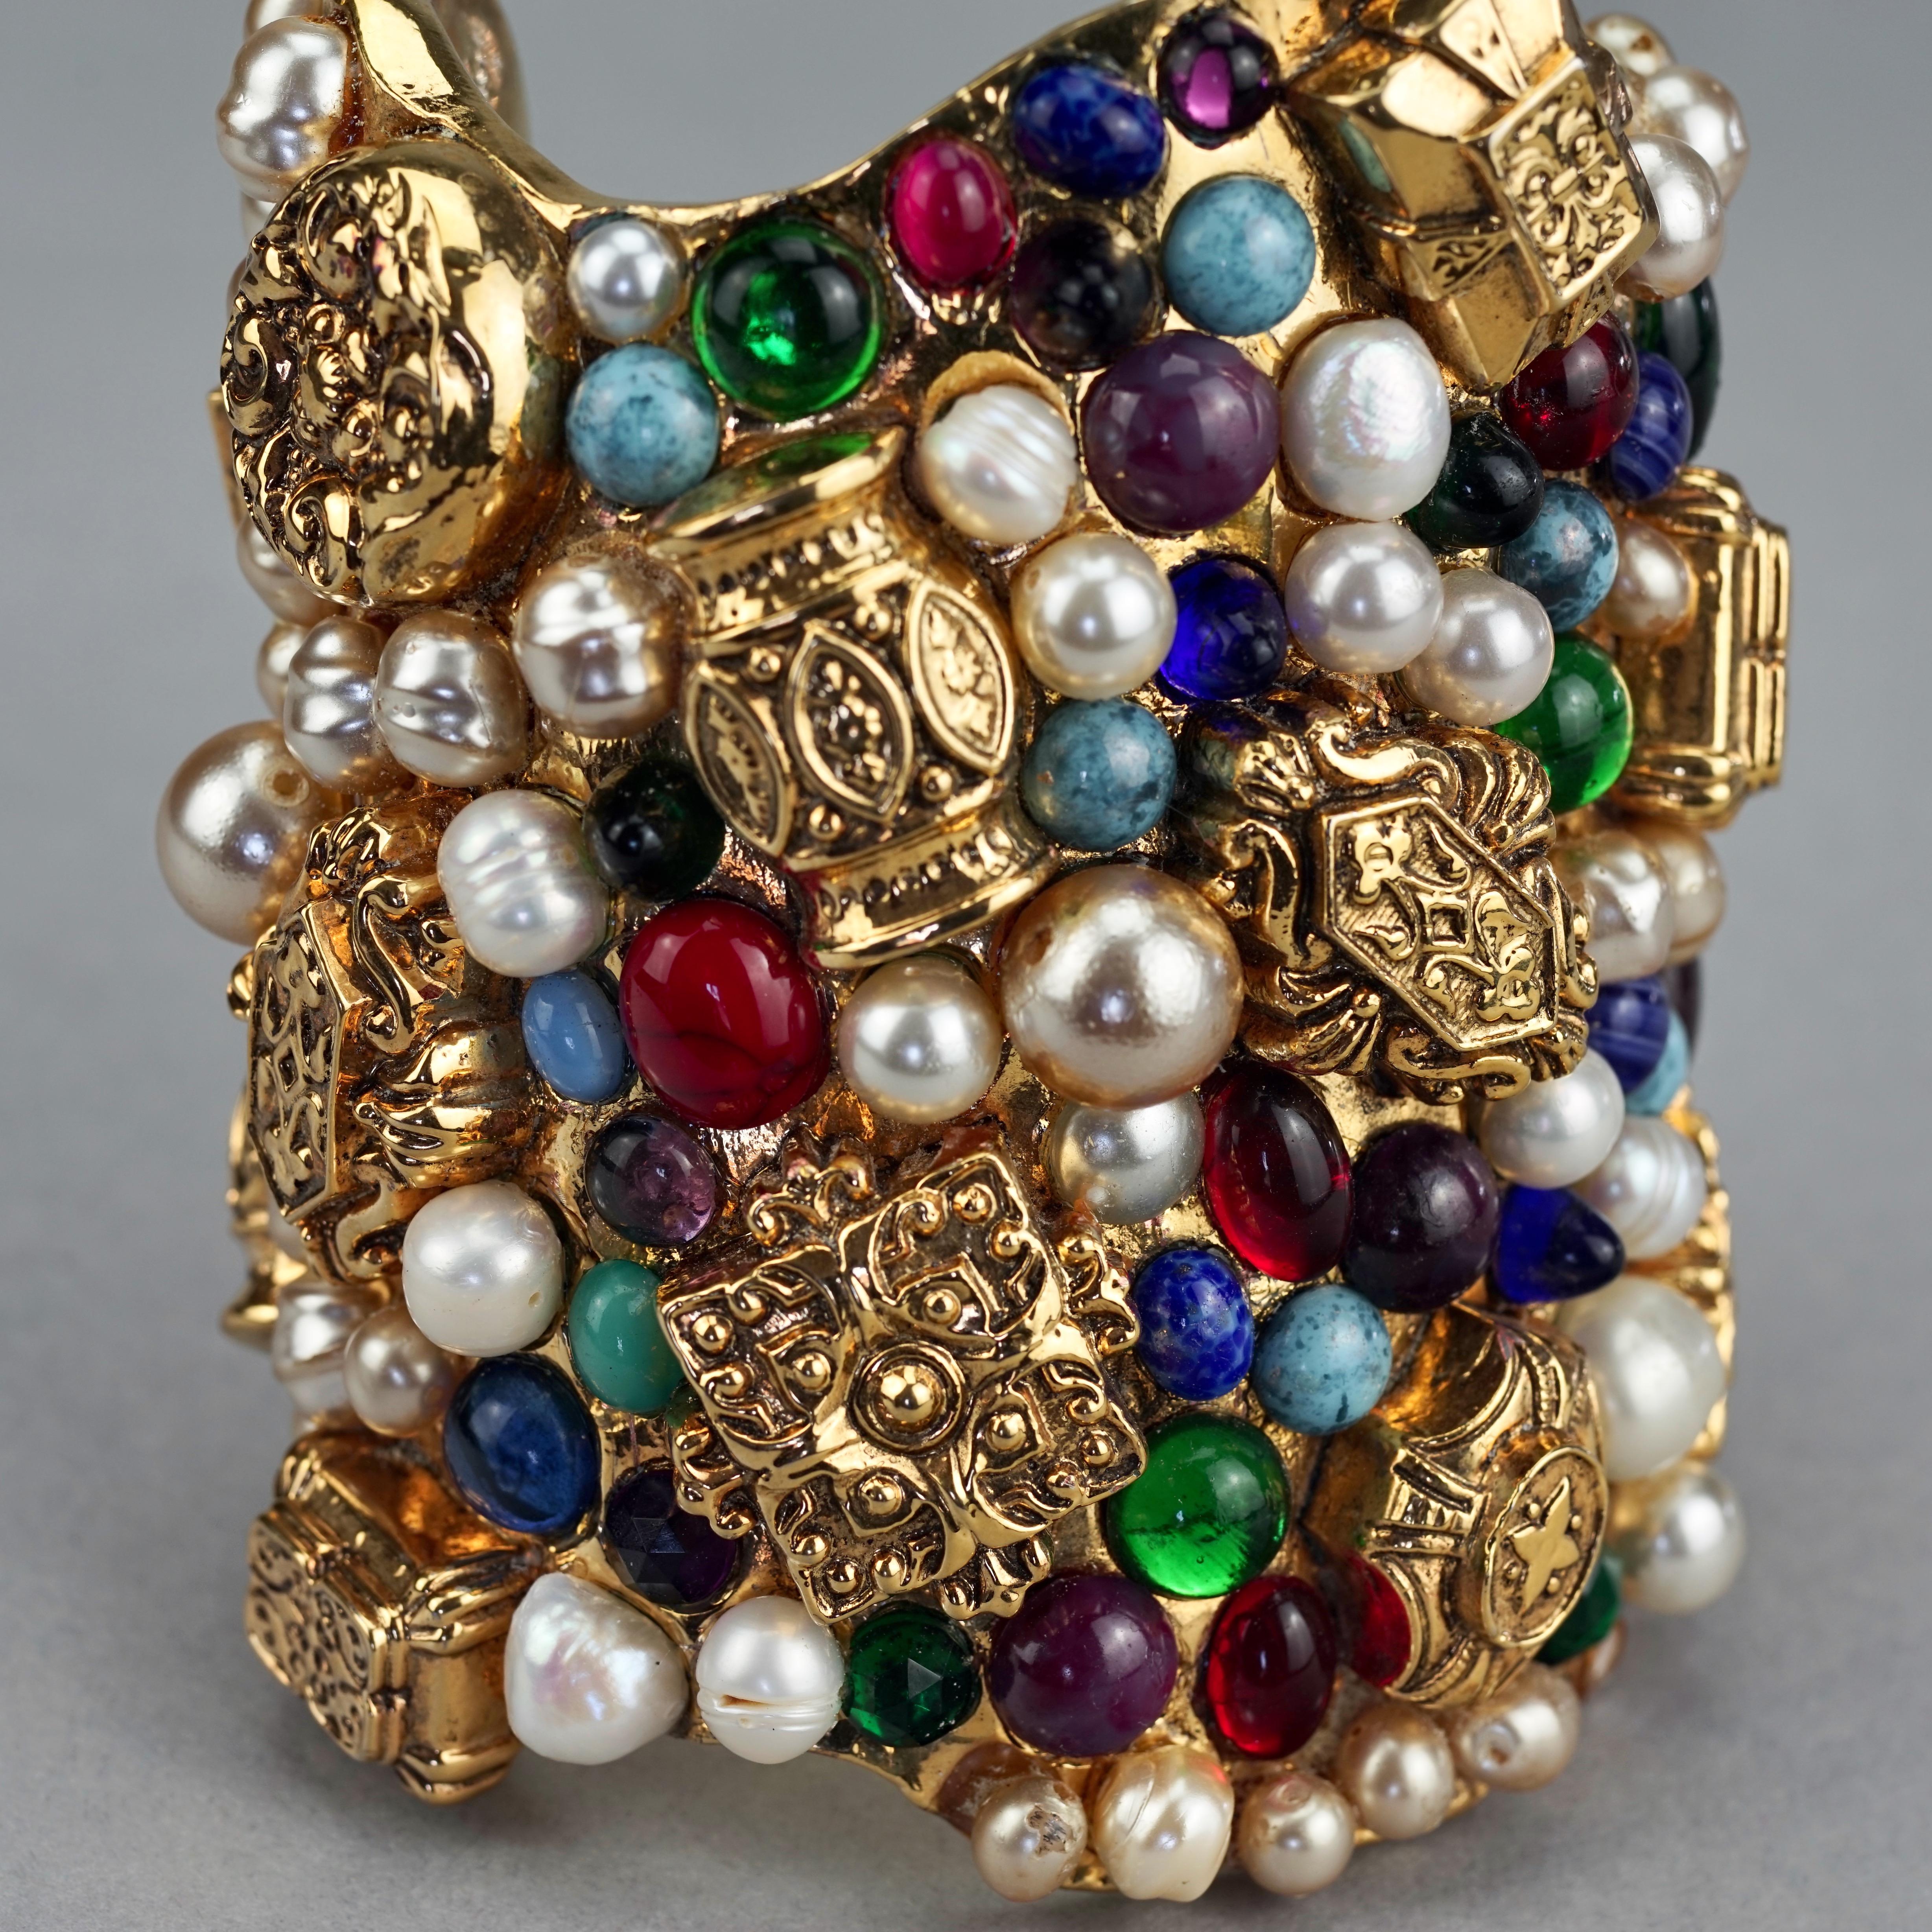 Vintage French Opulent Jewelled Cabochon Pearls Wide Cuff Bracelet For Sale 4